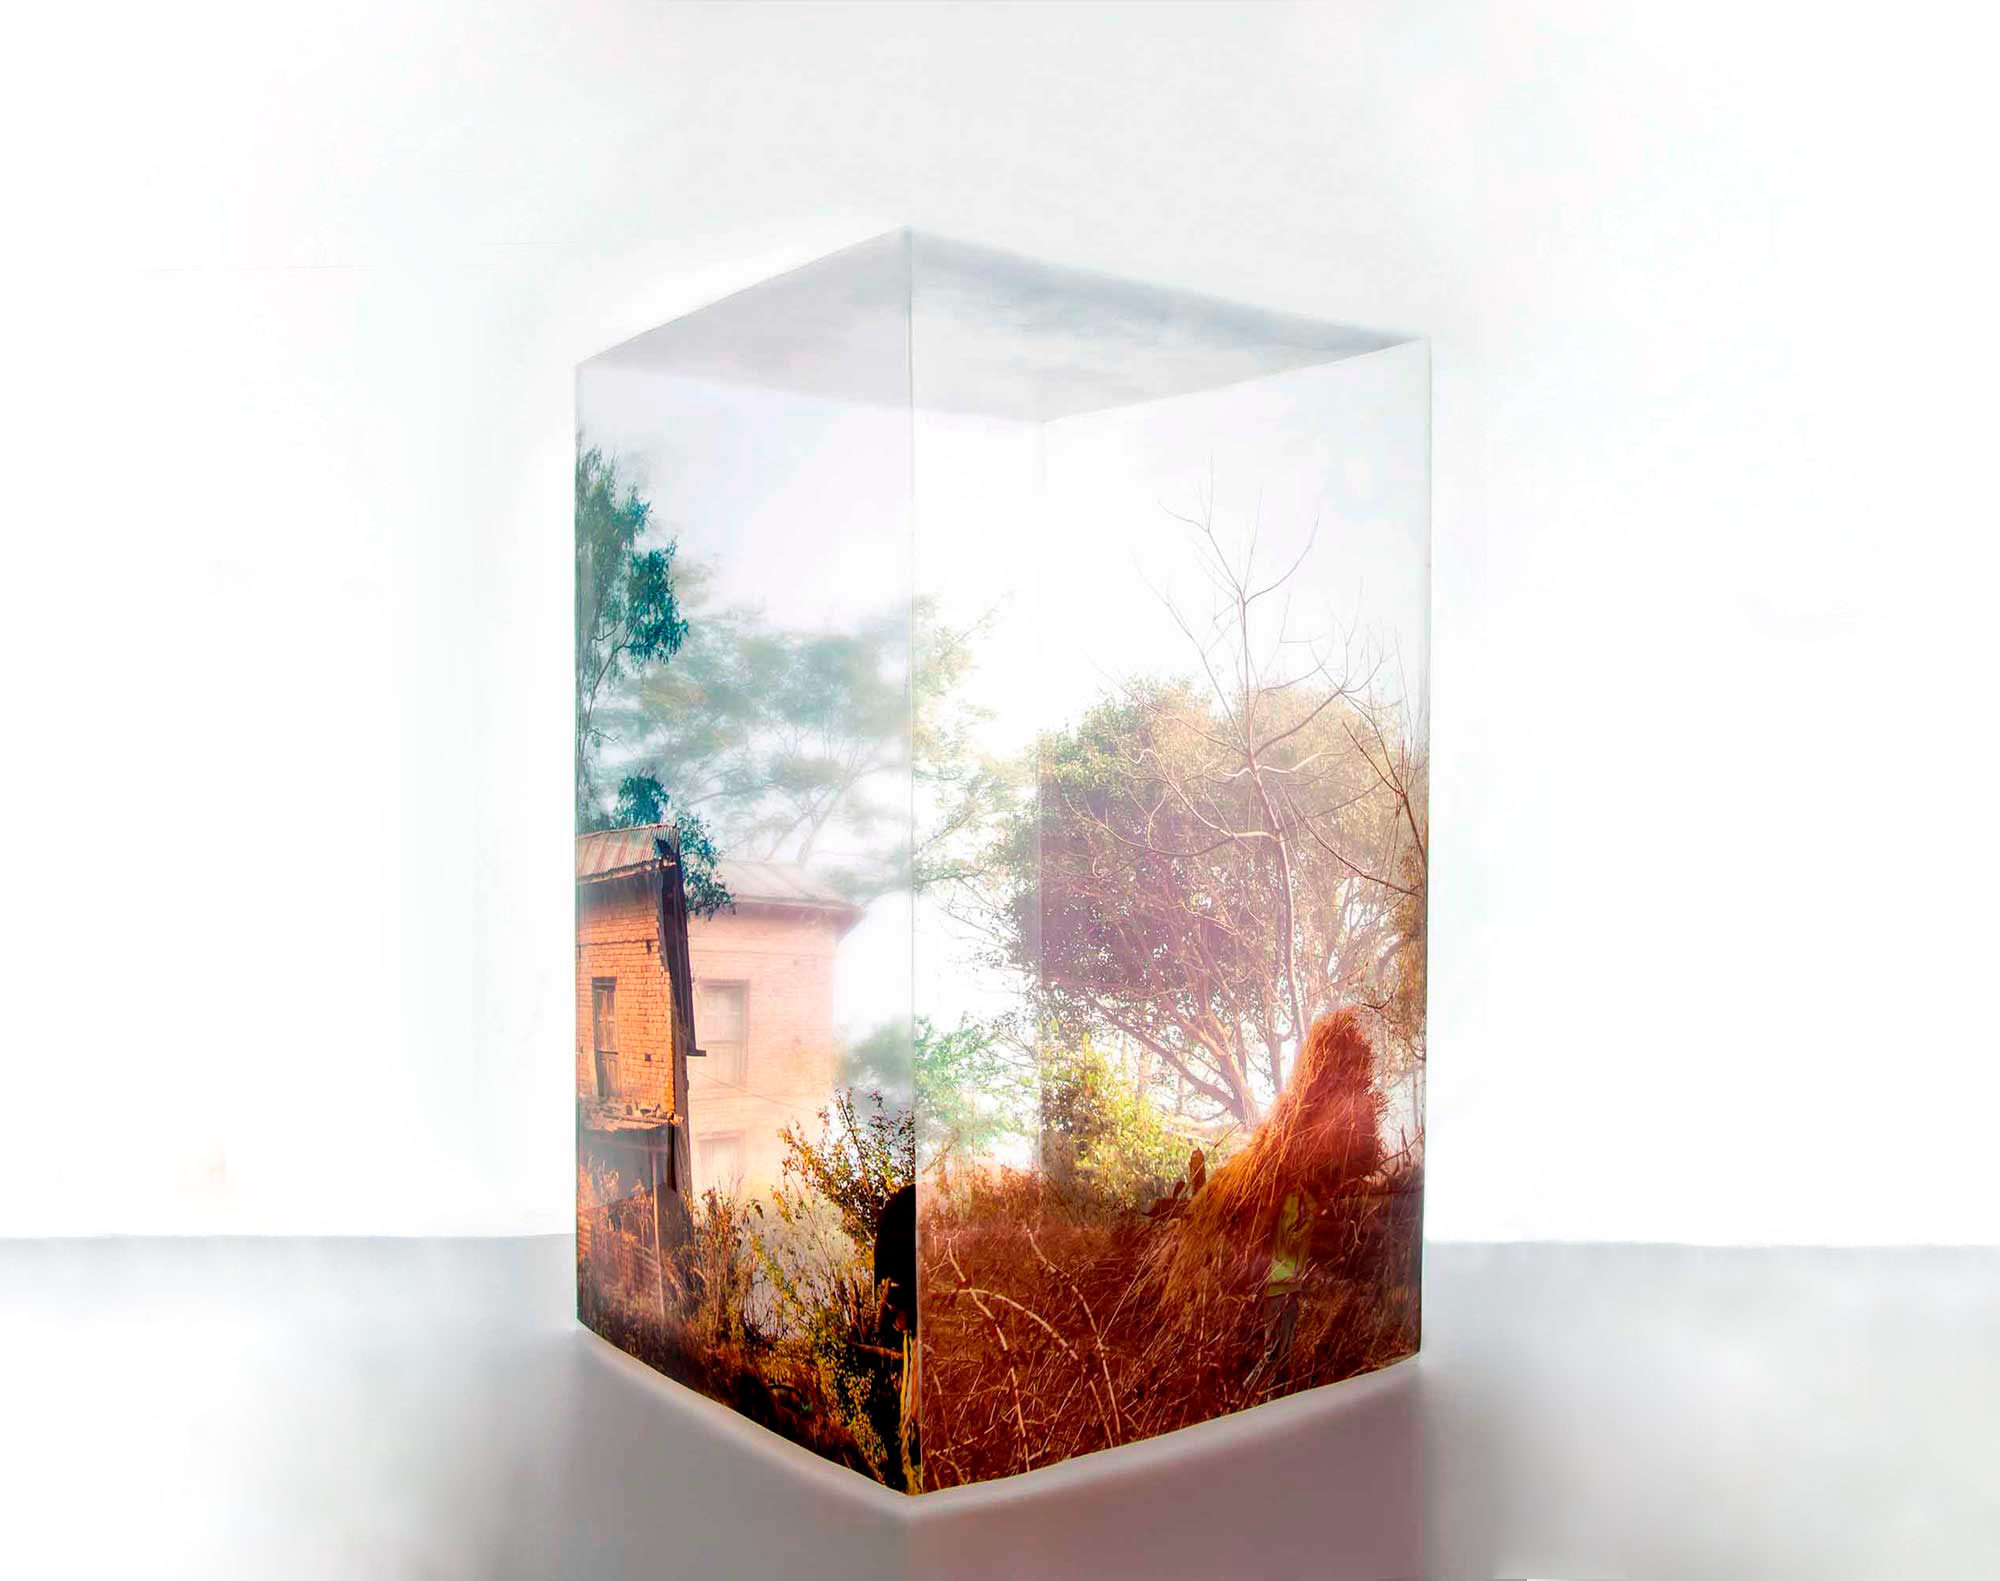 Photographic transparent sheet of the Himalayan Mountainside, Nepal, fused together to create a three-dimensional box.